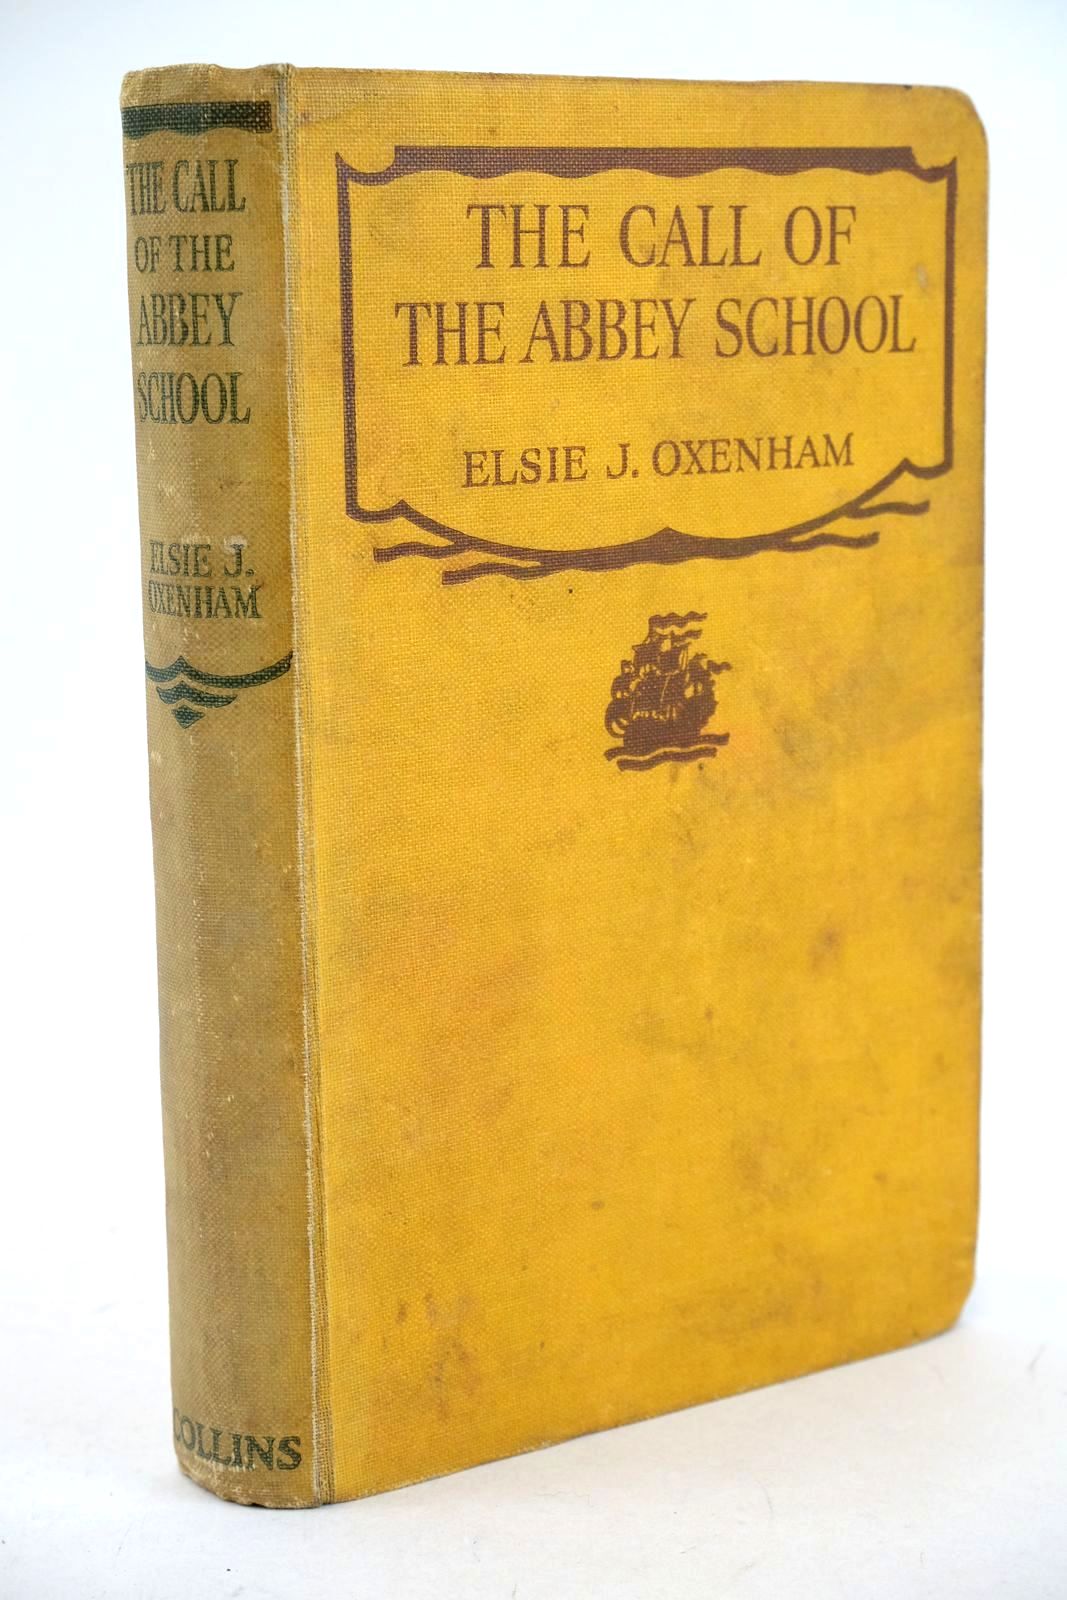 Photo of THE CALL OF THE ABBEY SCHOOL written by Oxenham, Elsie J. published by Collins Clear-Type Press (STOCK CODE: 1326836)  for sale by Stella & Rose's Books